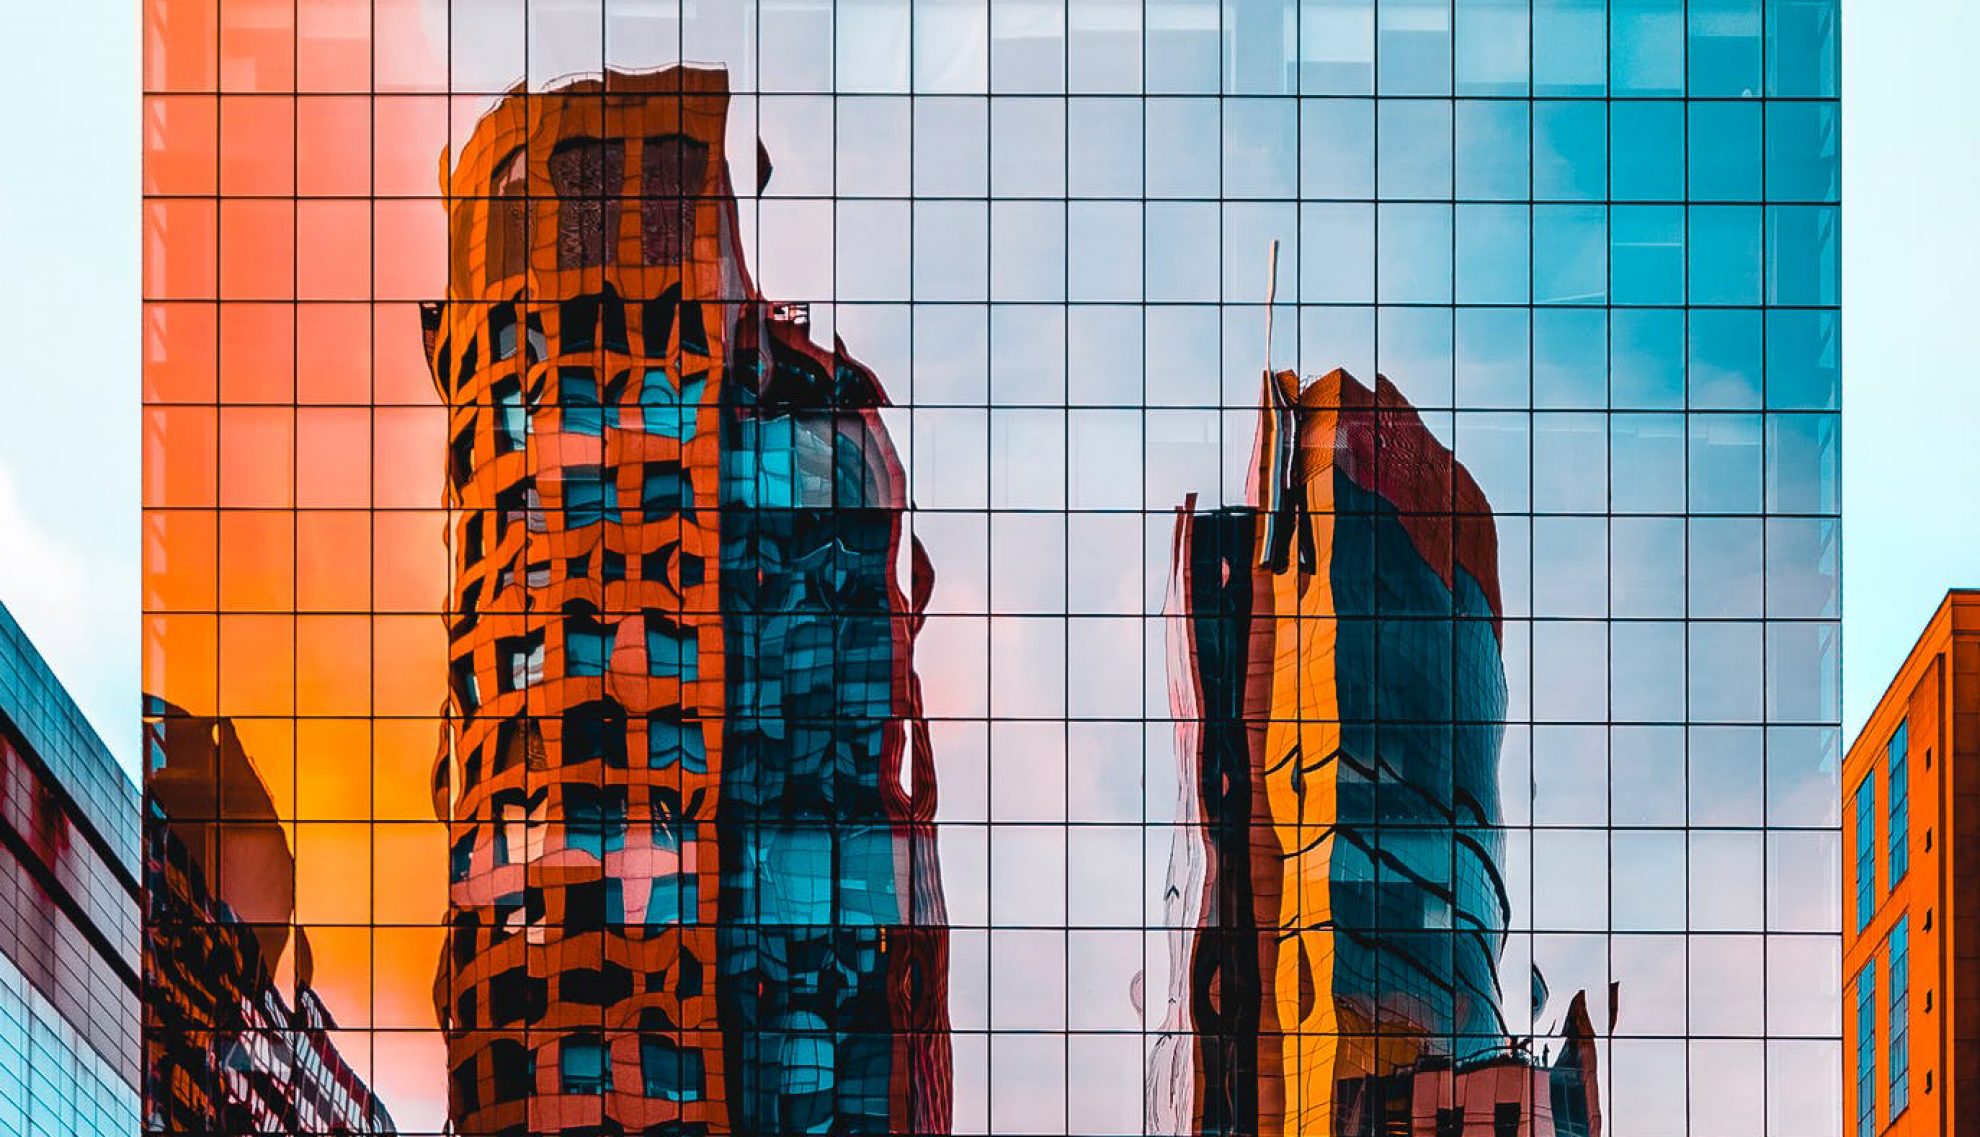 Yellow buildings reflected in mirrored windows